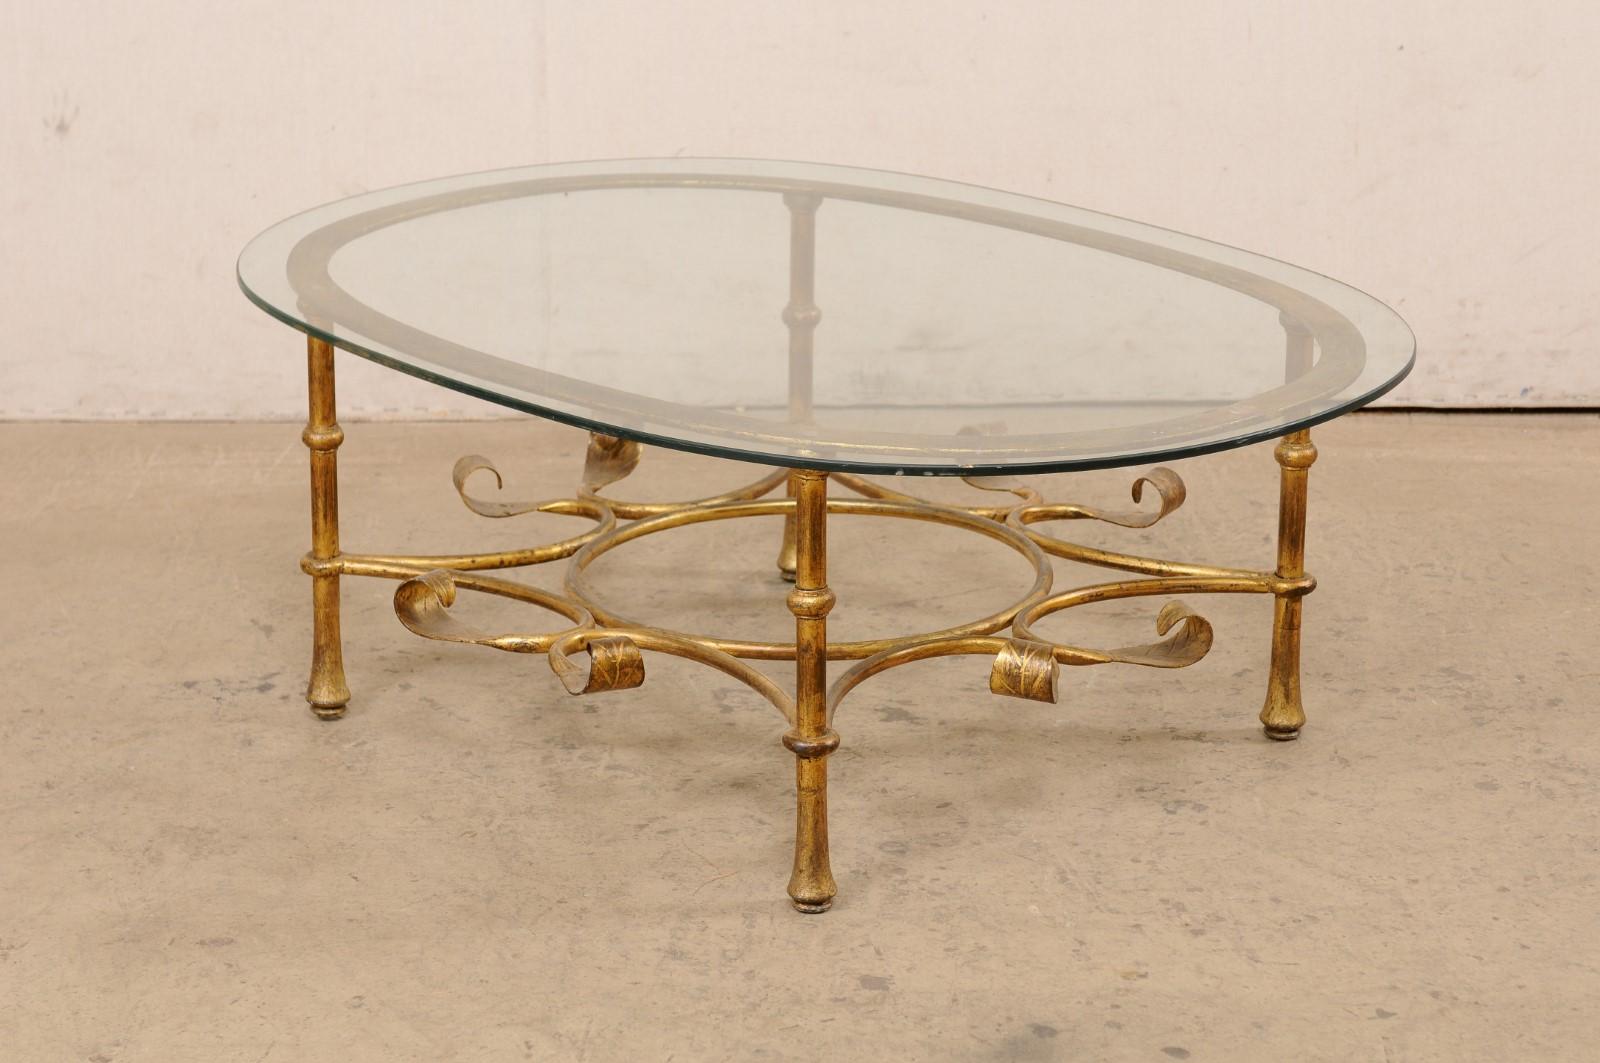 Spanish Oval Glass-Top Table with Iron Base (Gold Finish), Mid 20th C. 2